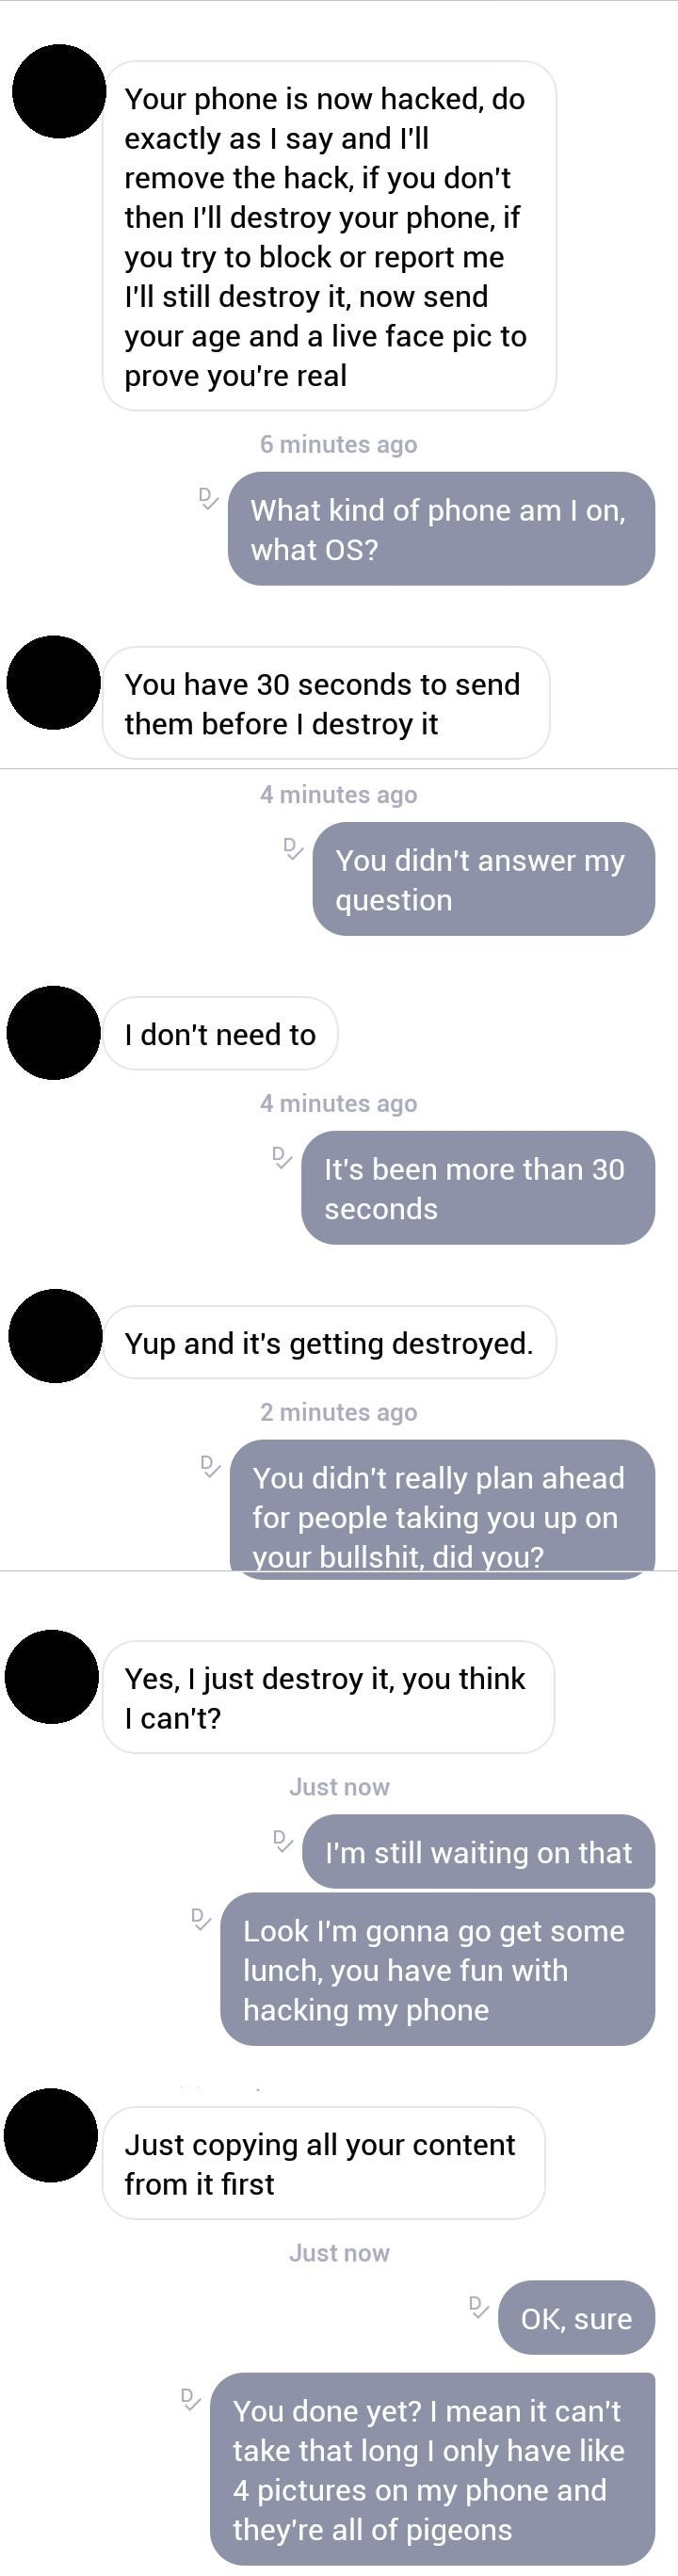 A text conversation where a hacker says they&#x27;ll destroy the person&#x27;s phone, but the person just asks what OS they&#x27;re using and the hacker can&#x27;t answer